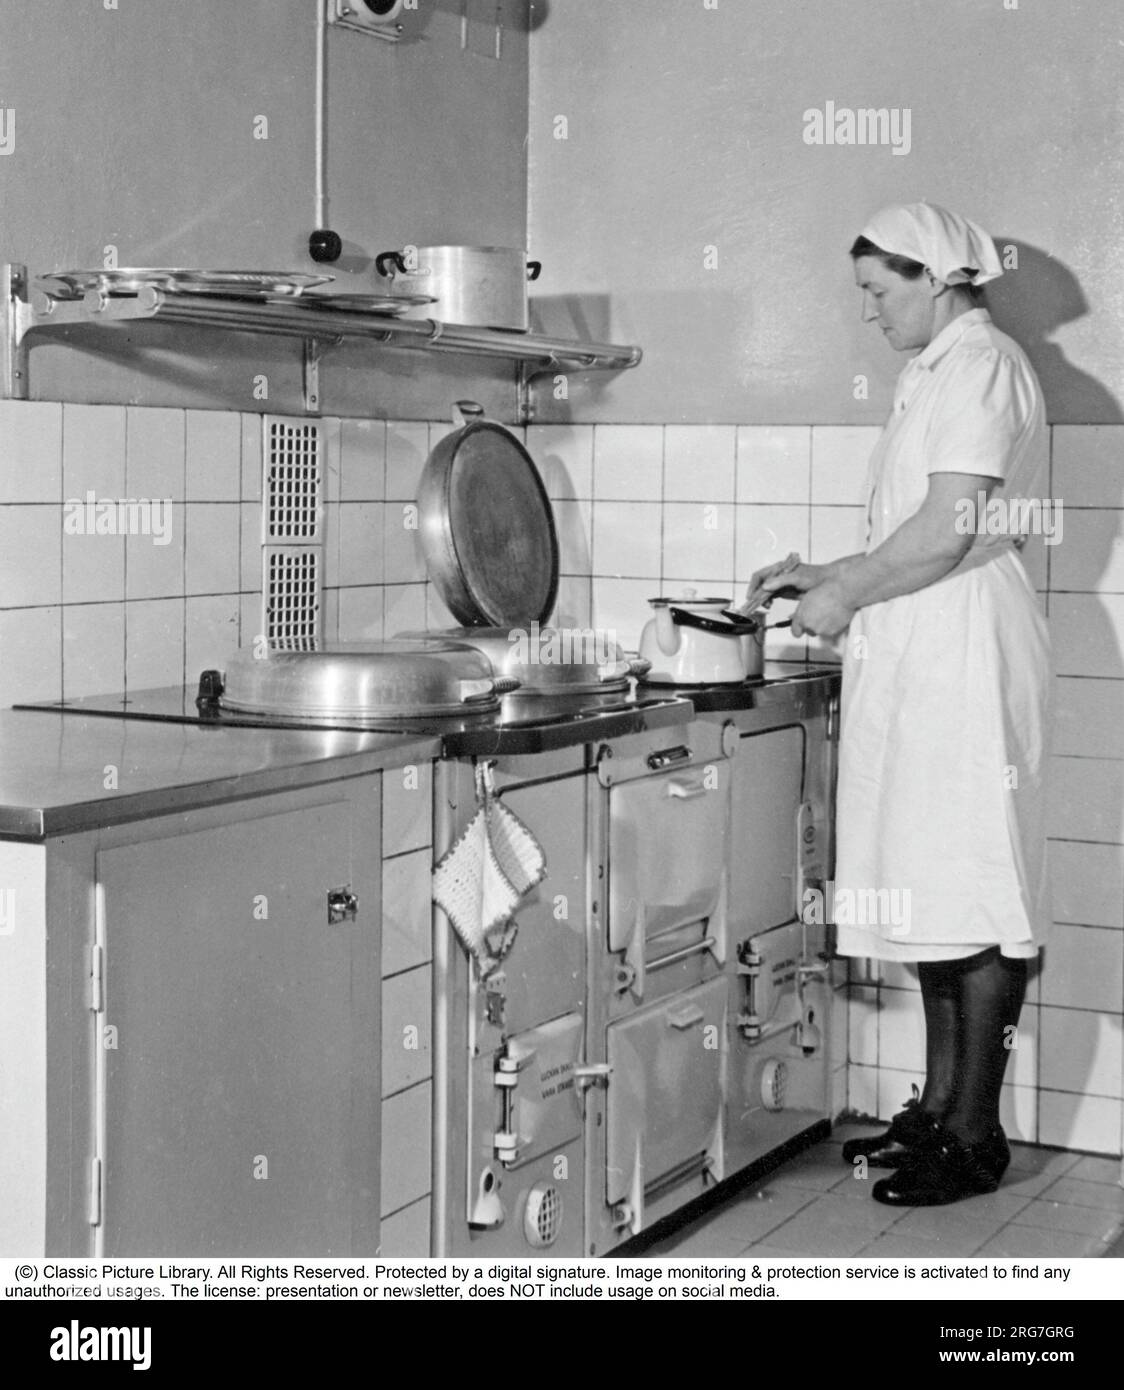 The AGA cooker. A swedish invention by Gustaf Dalén with the principle of heat storage, a combination of two large hotplates and two ovens into one unit, the AGA cooker. The oldest AGA cooker still in use belongs to the Hett family of Sussex and it was installed 1932. This picture was taken 1950 where a woman is seen cooking something on the stove. Sweden Stock Photo